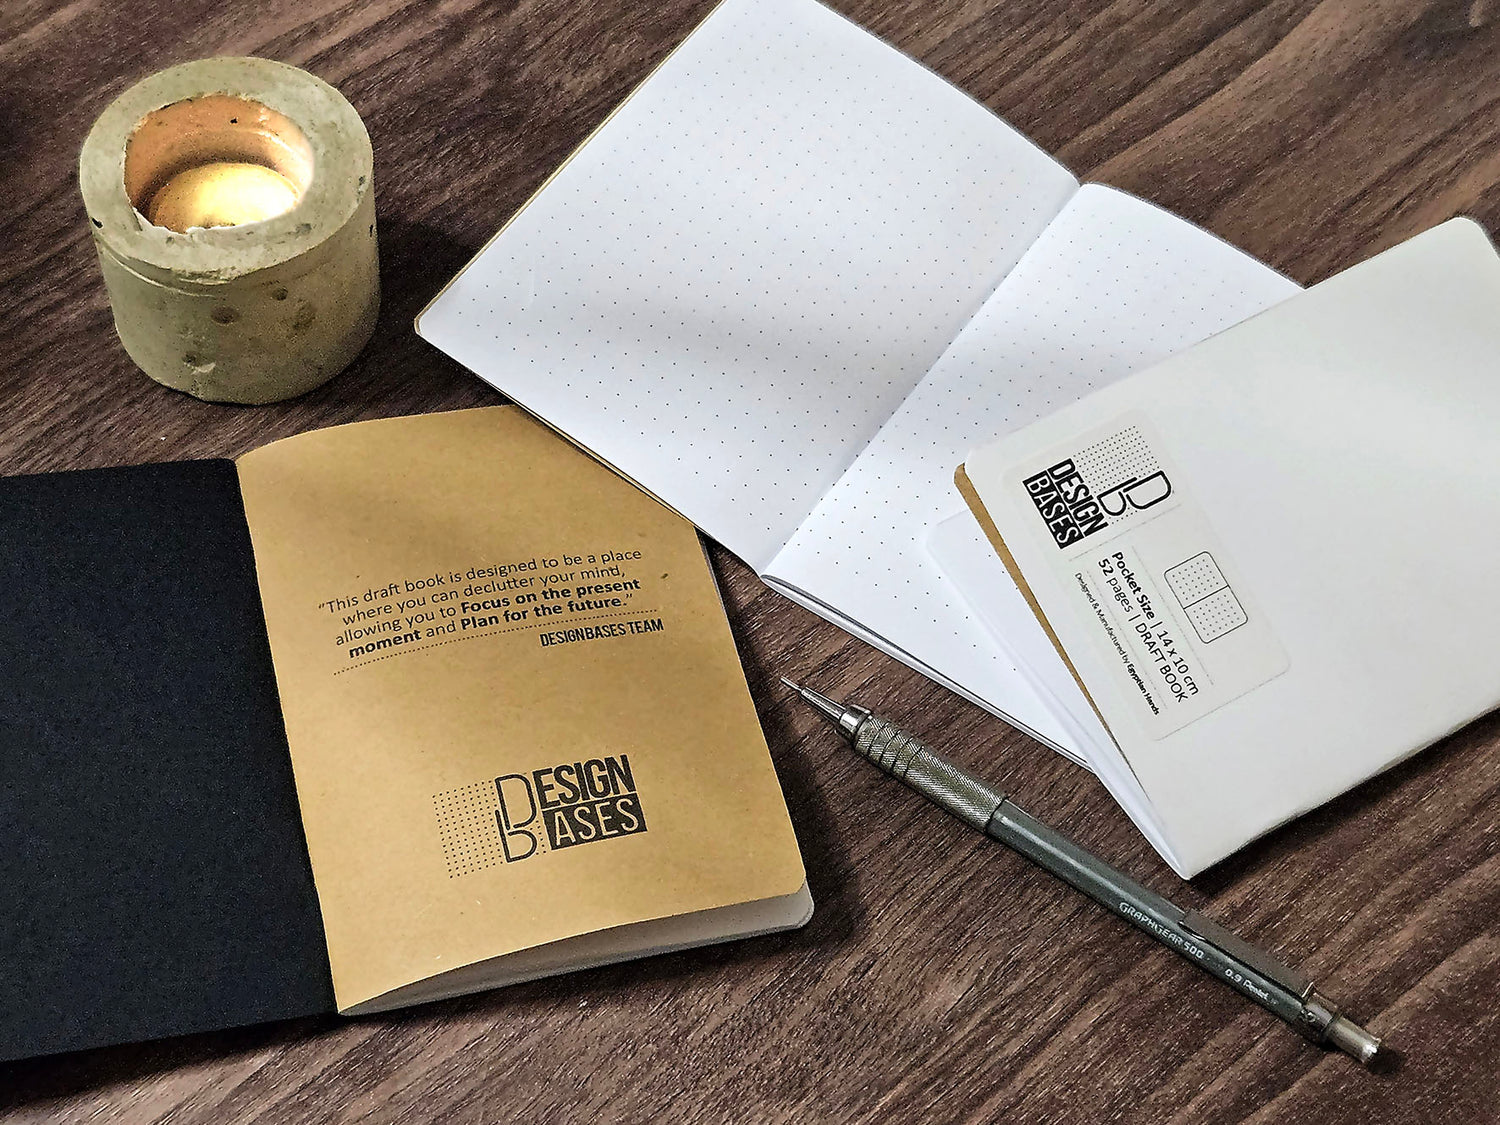 Pocket Notebook - Field Notes - Memo Book - Dotted